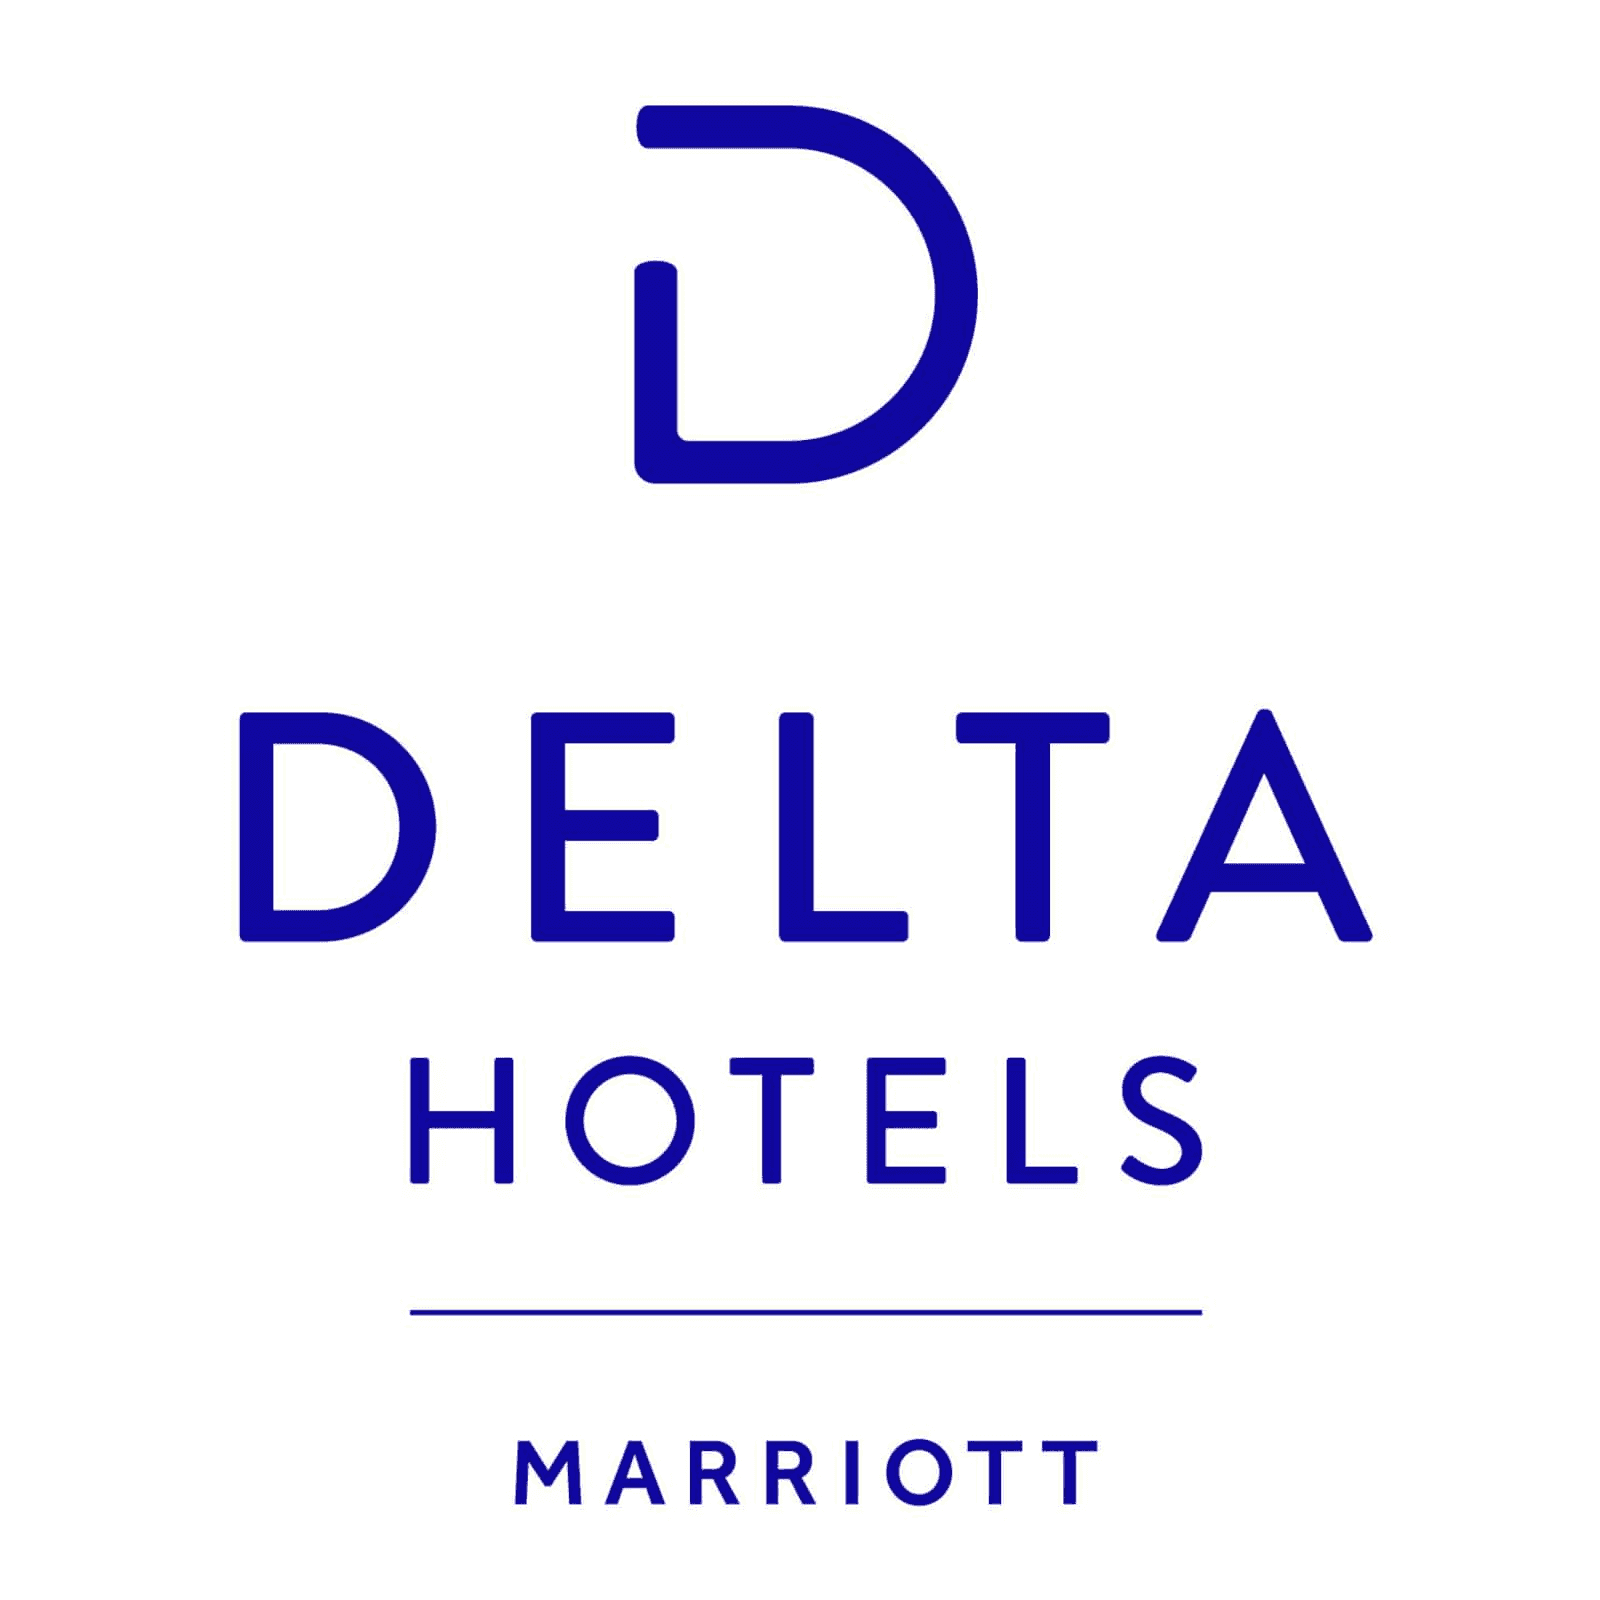 <p><span class="ql-size-small">DELTA HOTELS</span></p><p>by Marriott</p><p><em>Toronto Airport and Conference Centre</em></p> logo